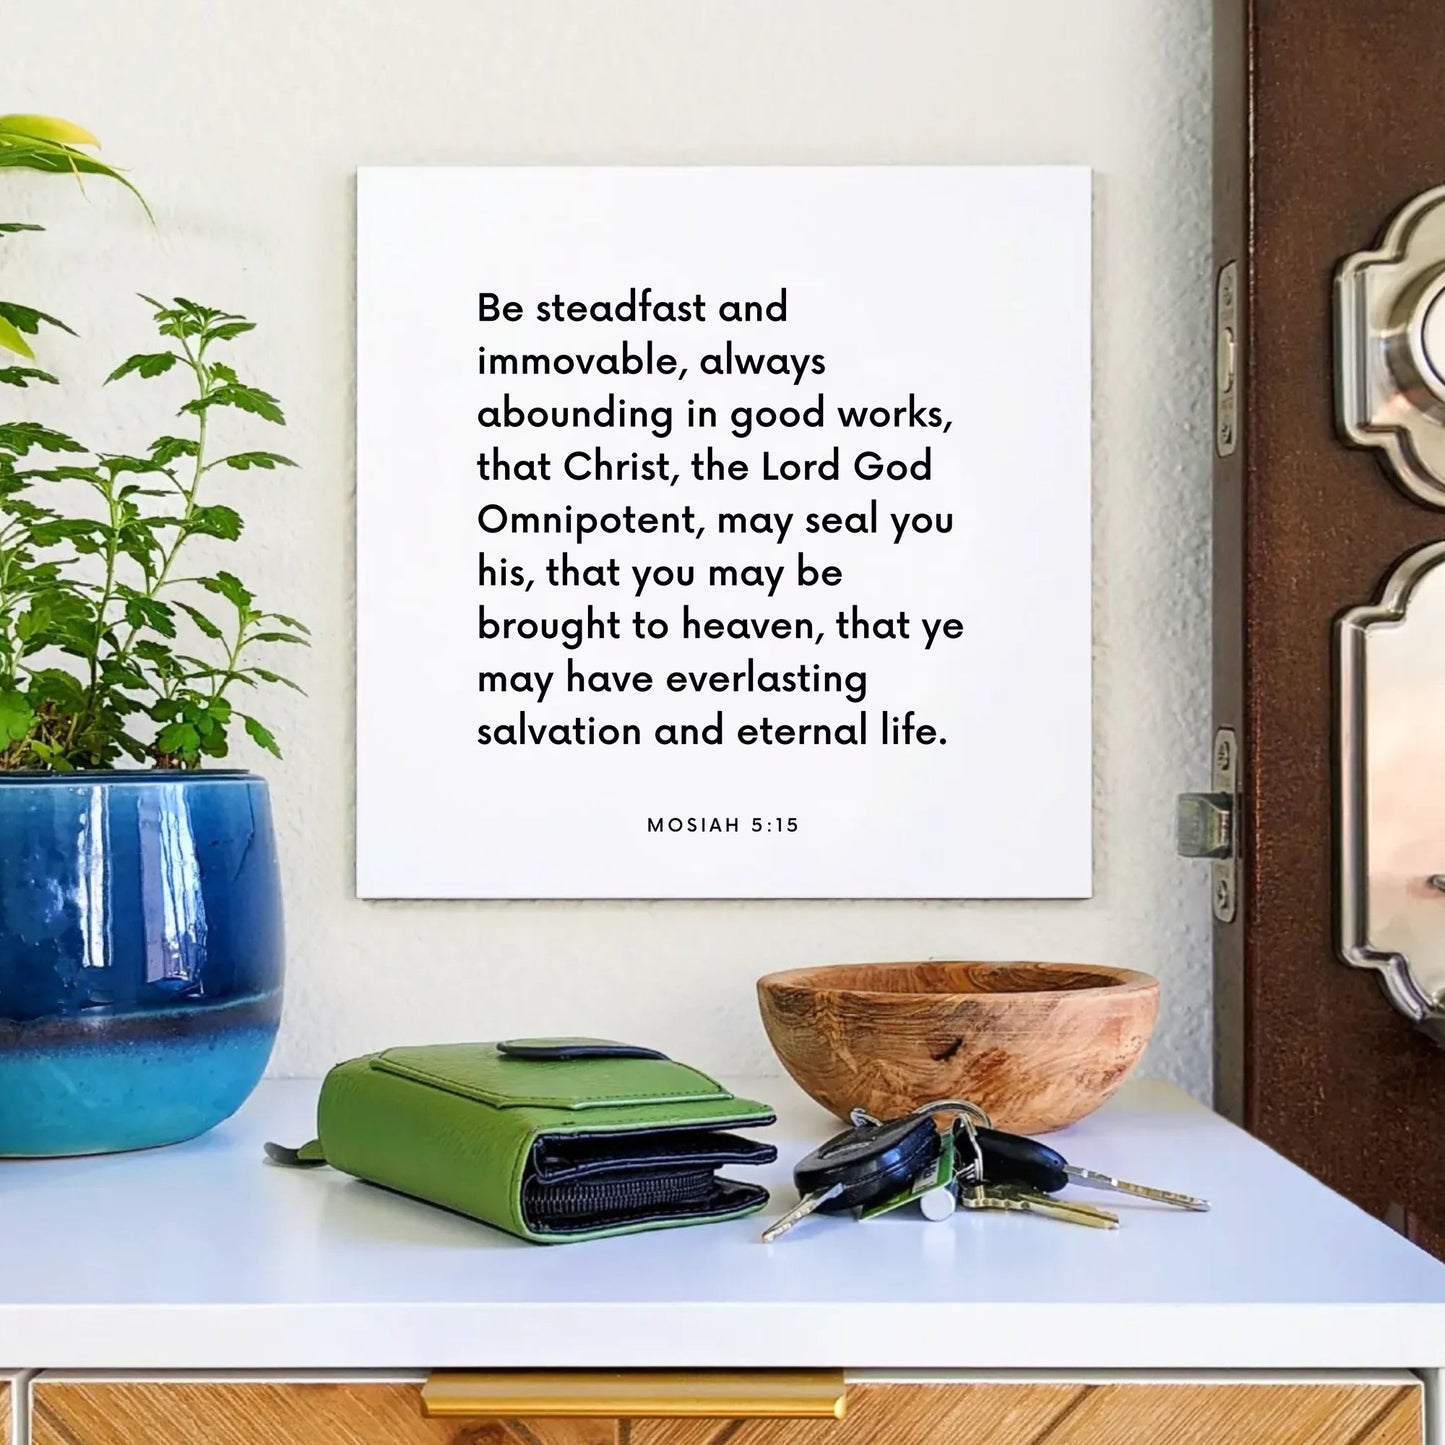 Entryway mouting of the scripture tile for Mosiah 5:15 - "Be steadfast and immovable, always abounding in good works"